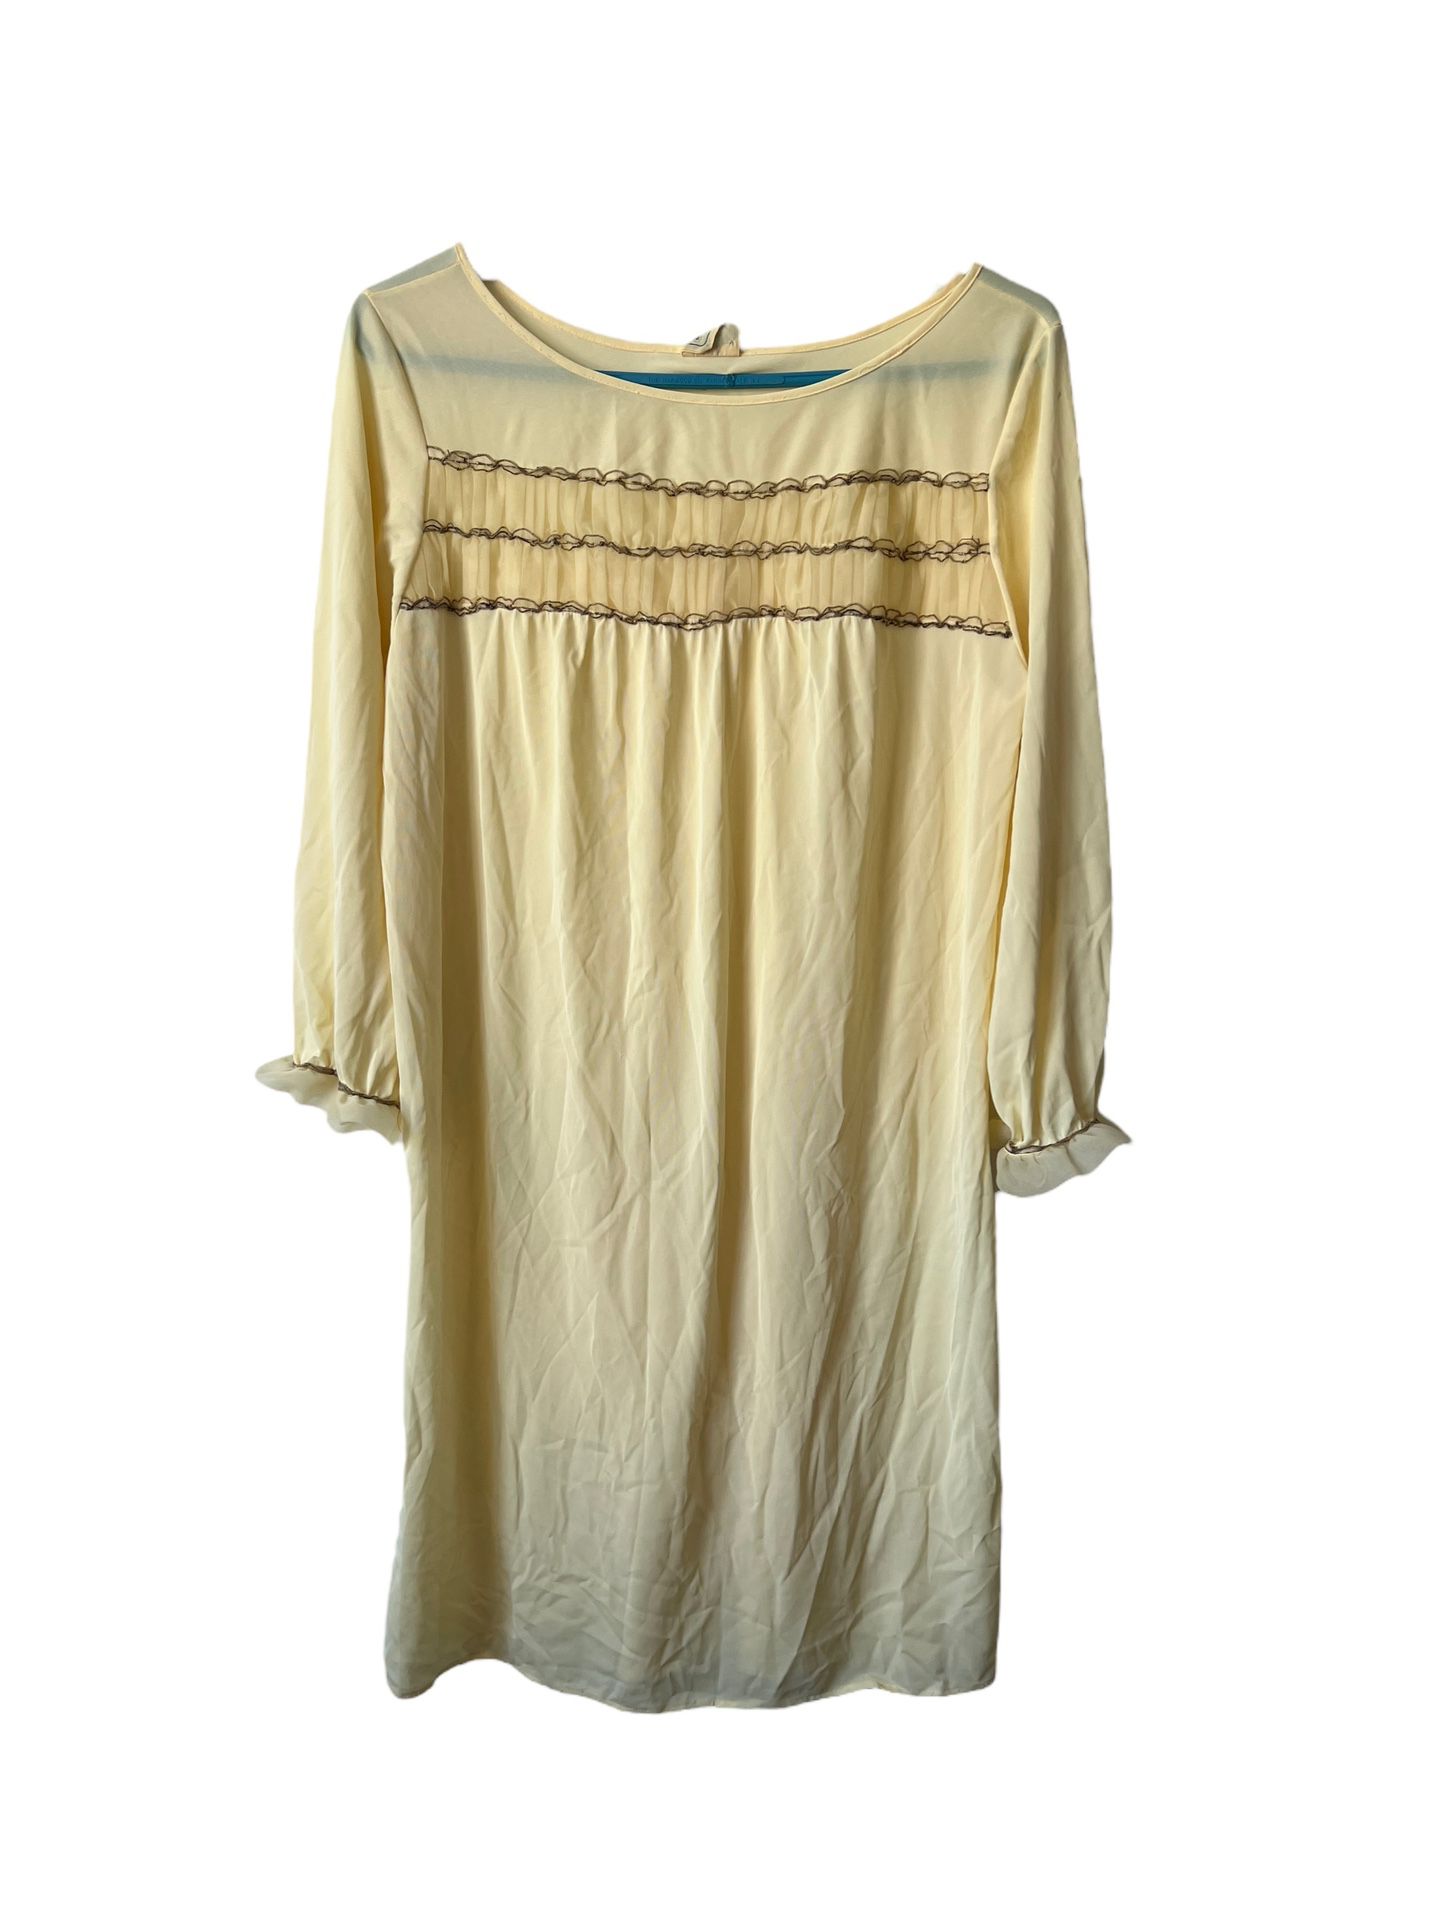 Vintage Carol Brent Yellow Night Gown look at measurements Nylon, ruffled front.  The size tag was cut but I took the measurements.  Based on them I b